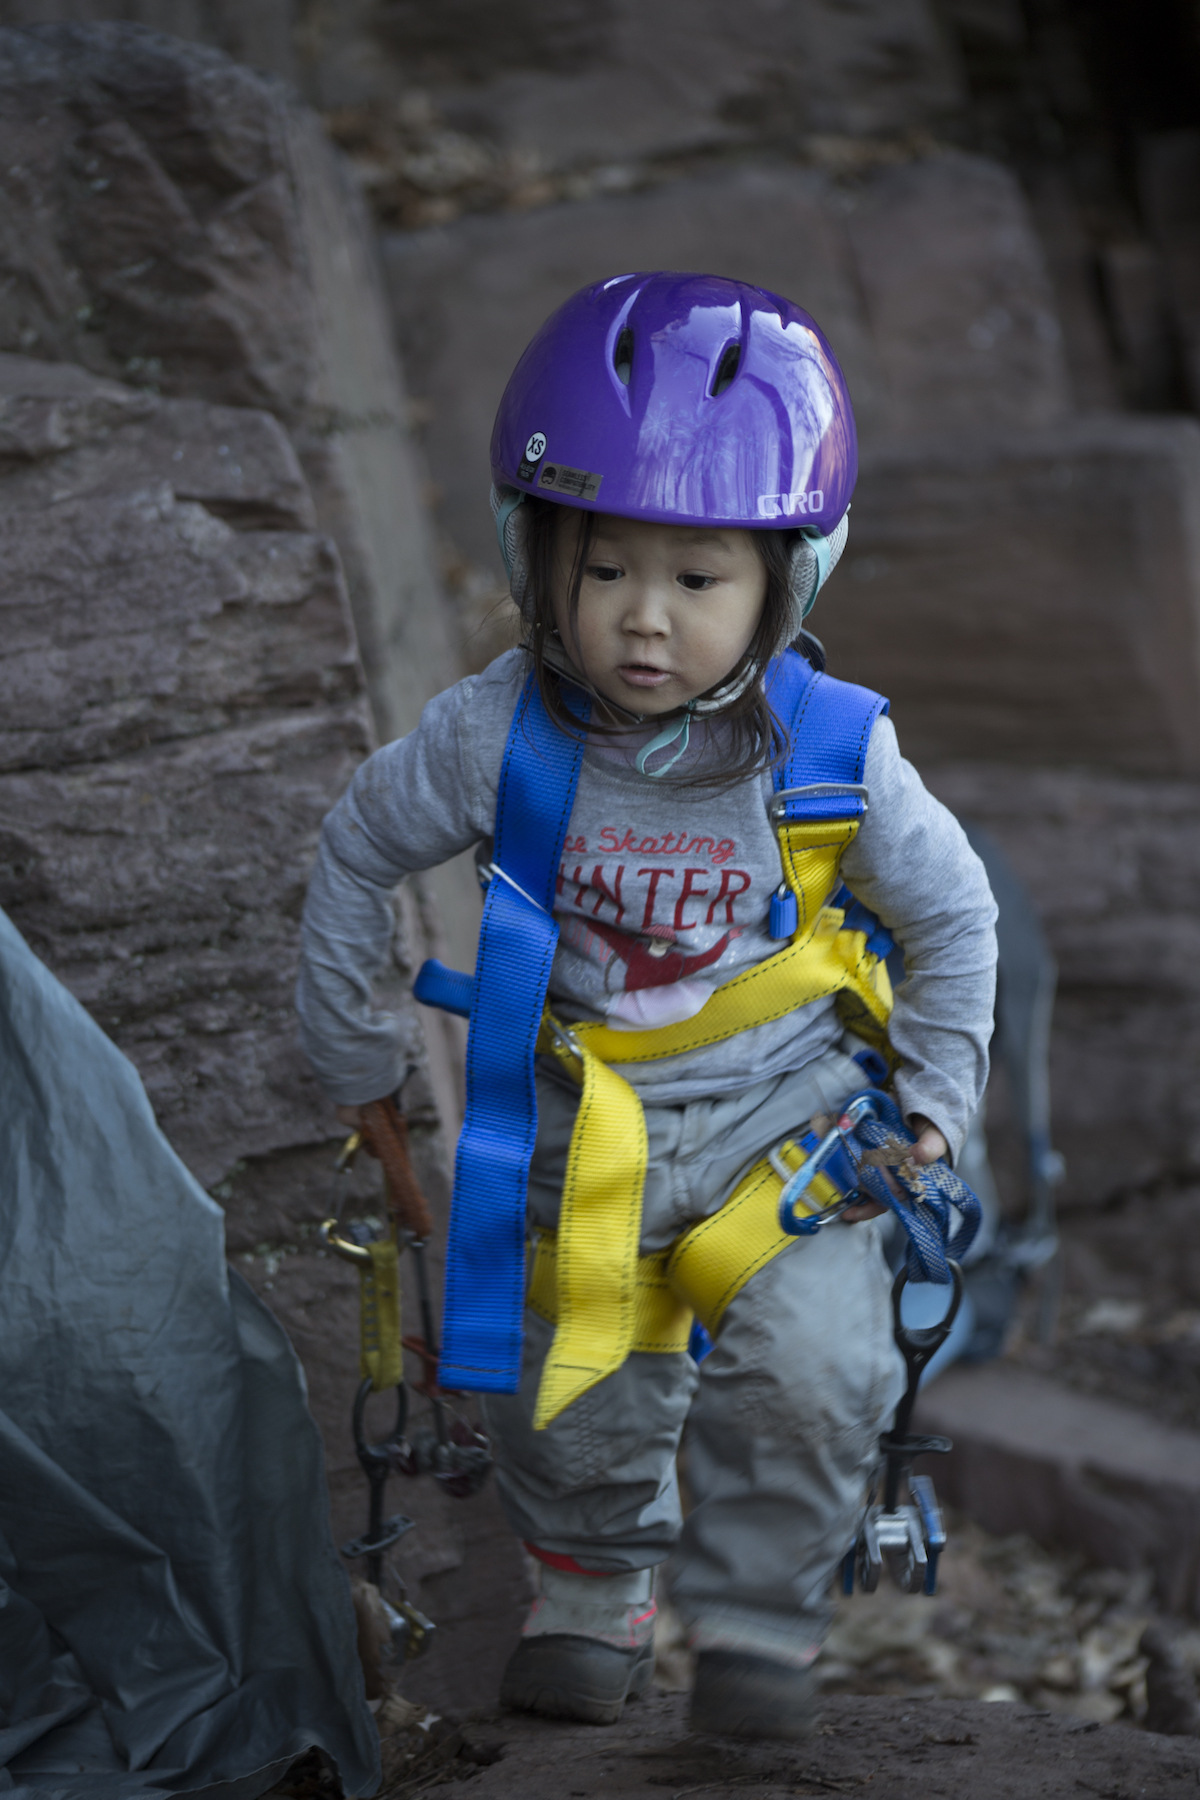 Three-year-old Riley retrieves some cams for her brother. [Photo] Leslie Hsu Oh